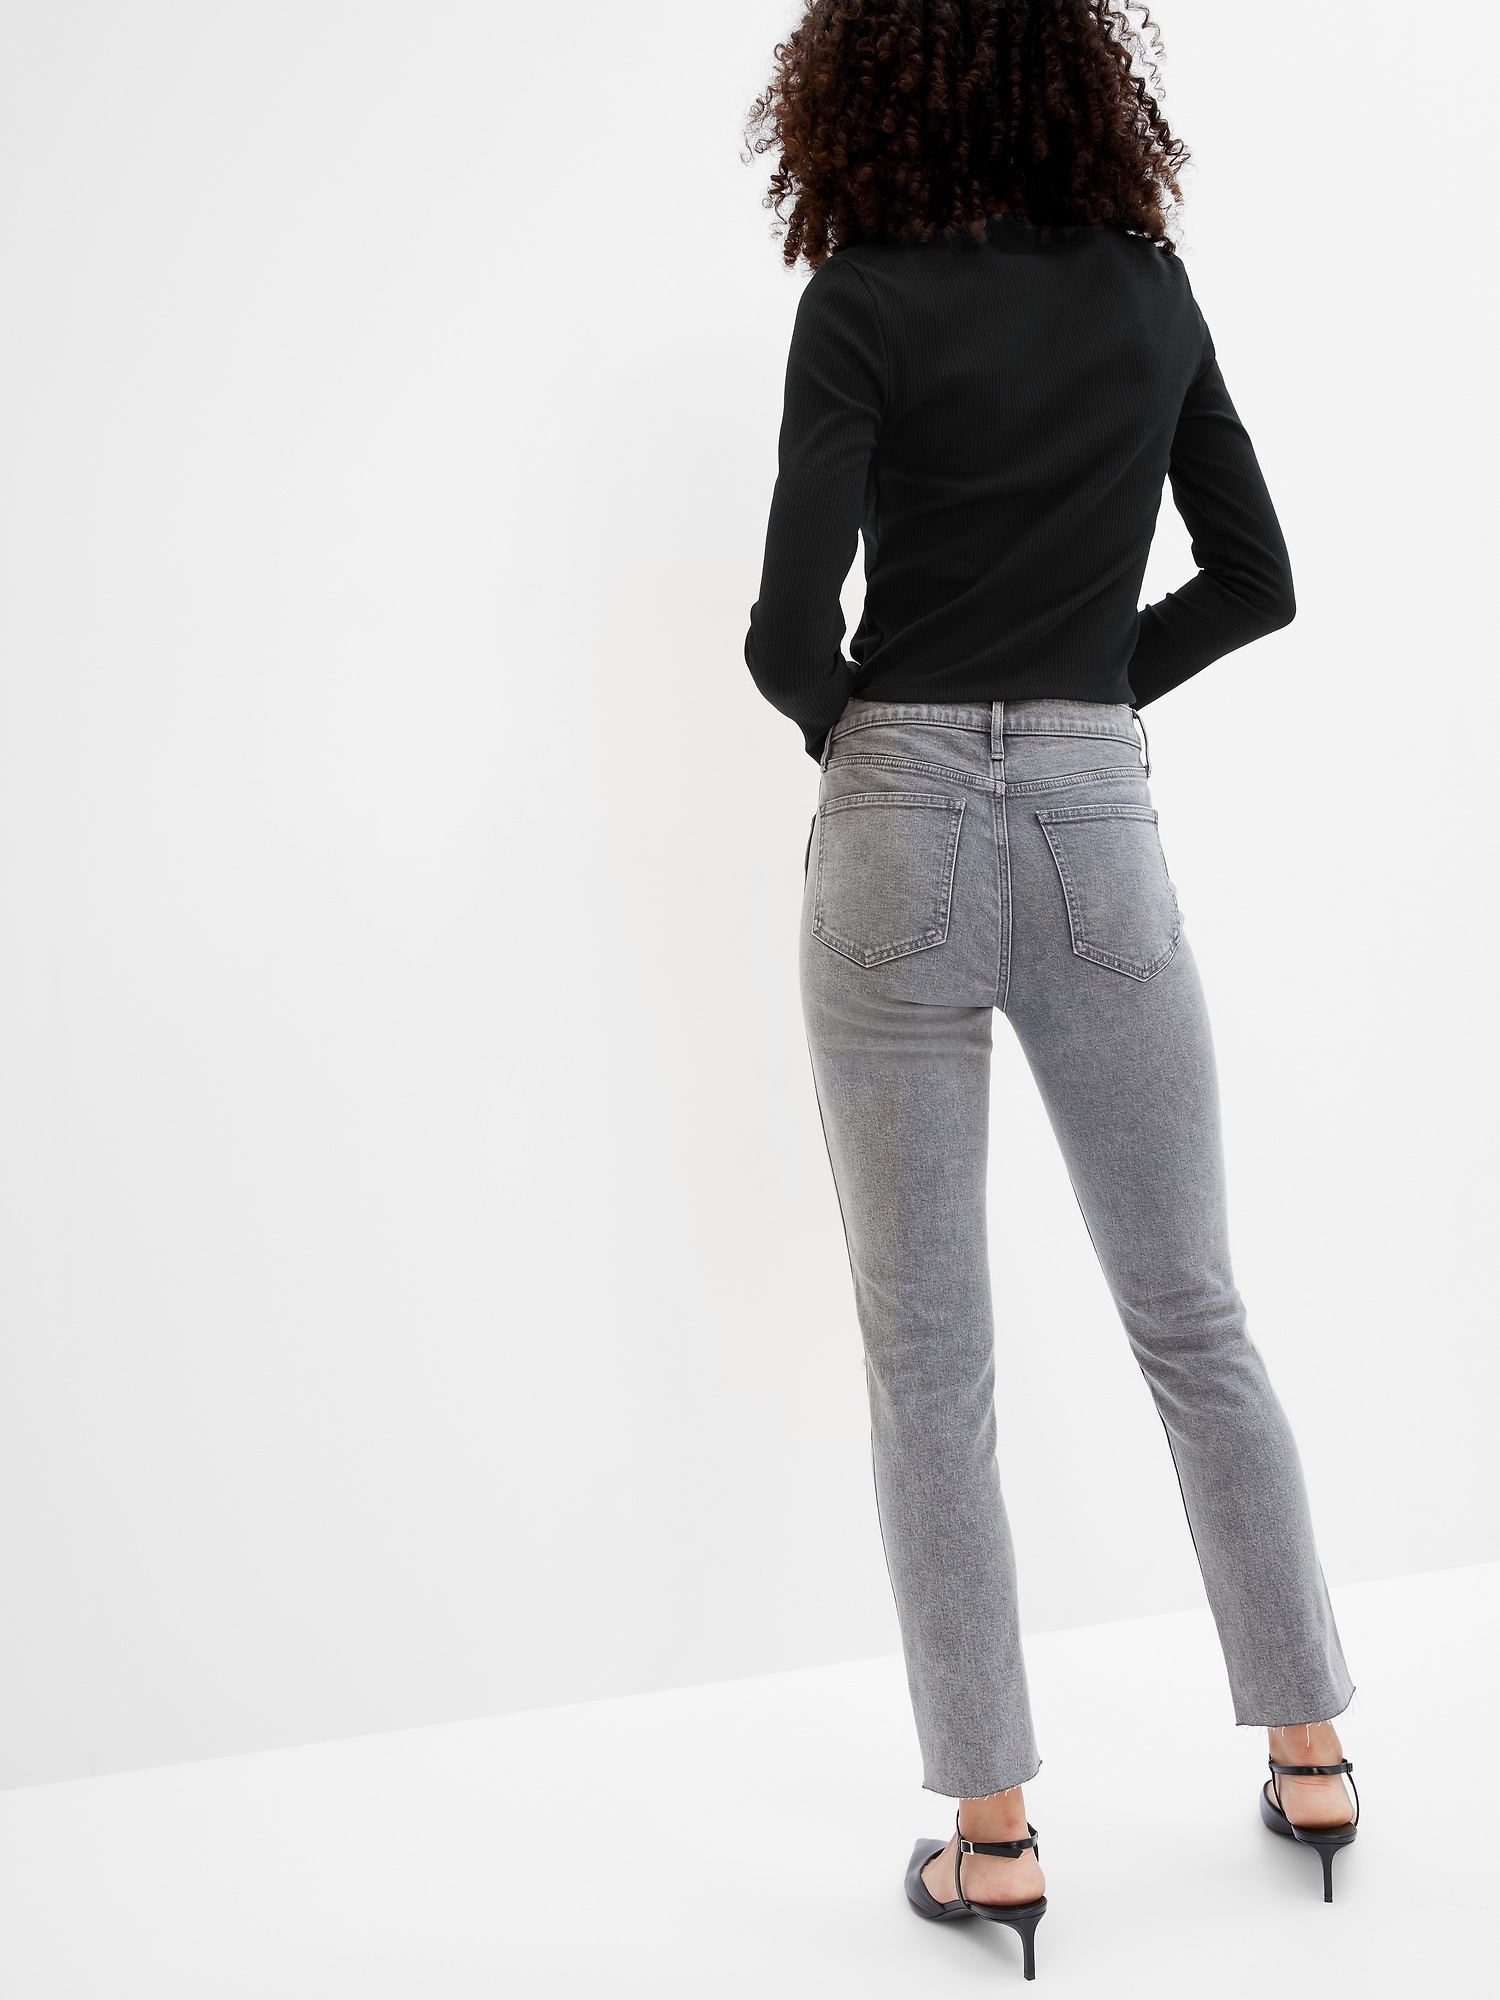 Mid Rise Vintage Slim Jeans with Washwell | Gap